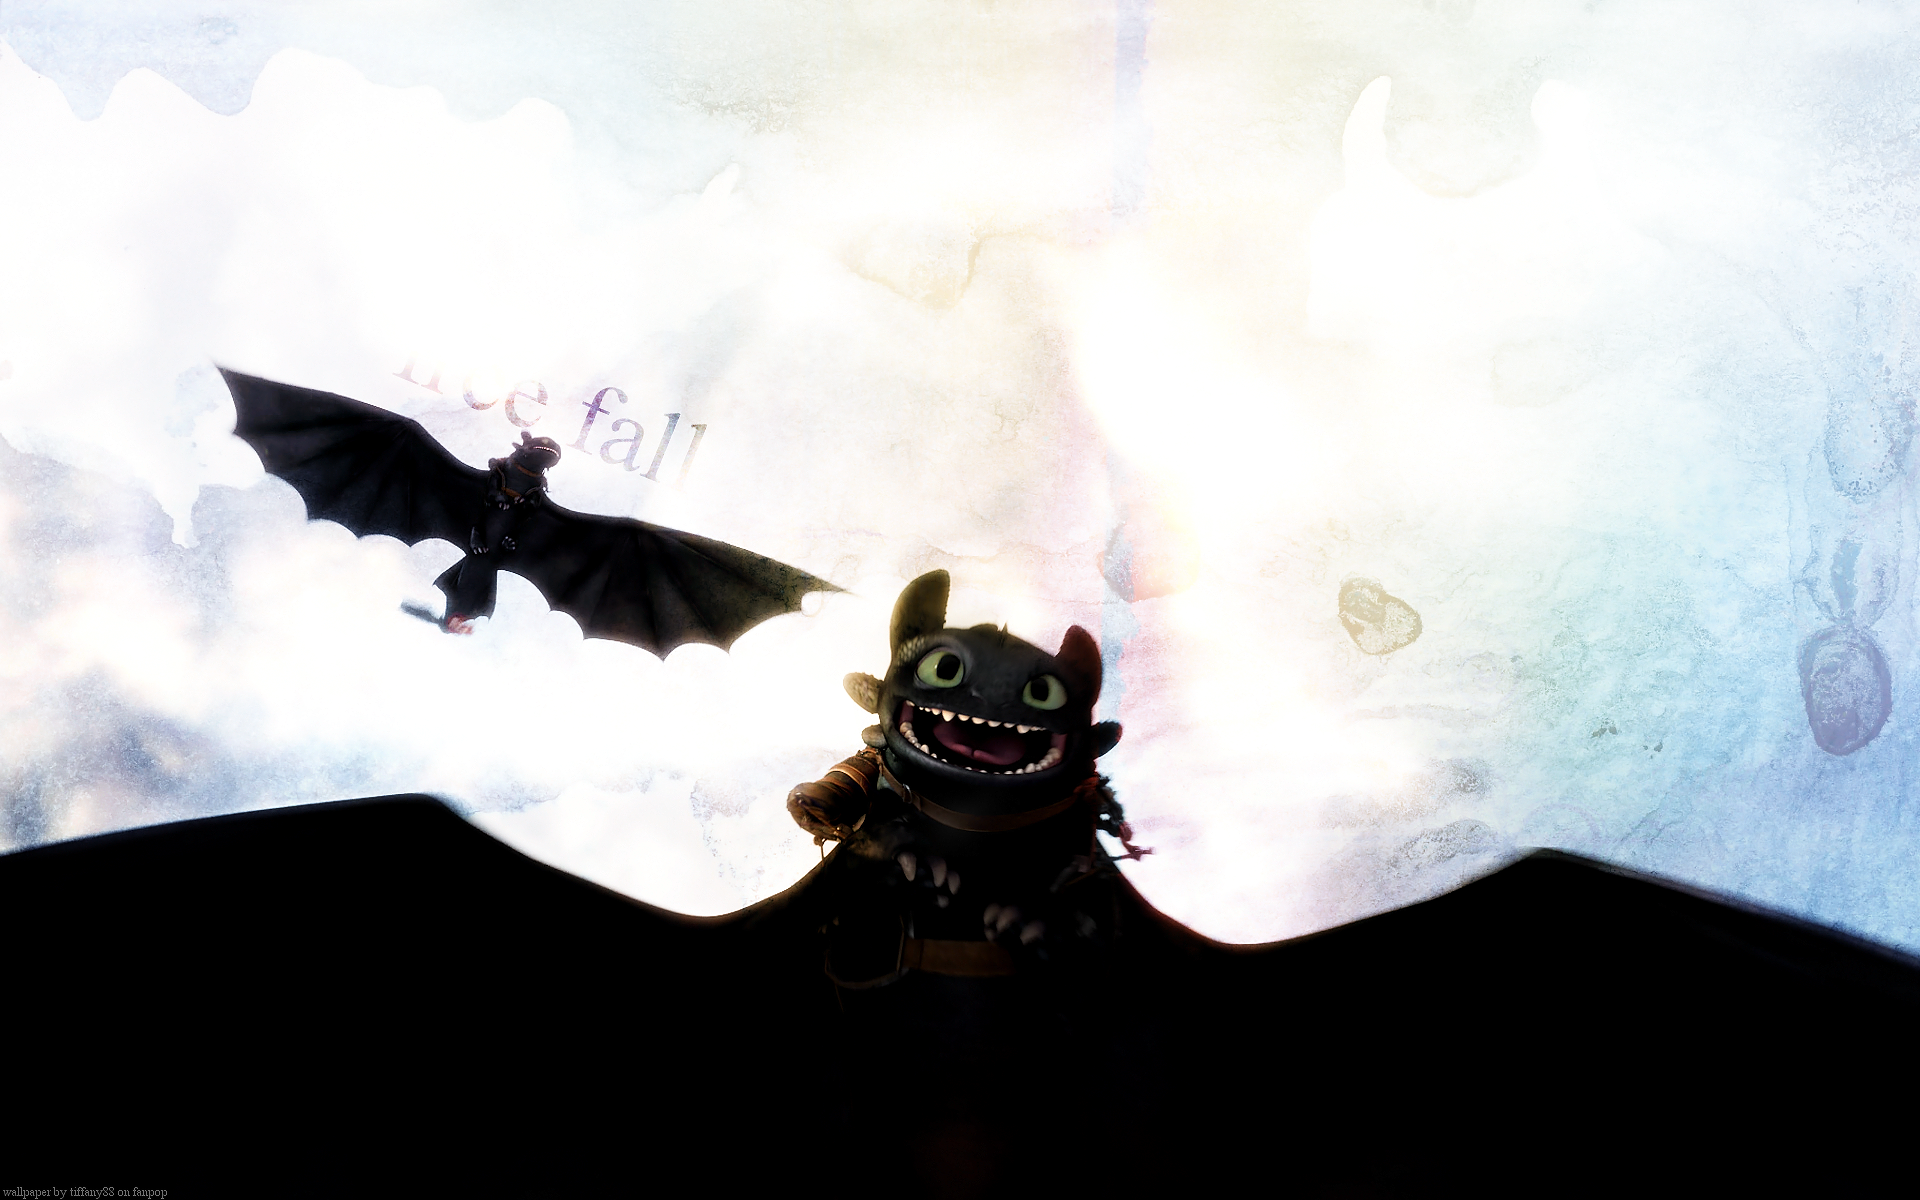 toothless hq wallpaper how to train your dragon wallpaper